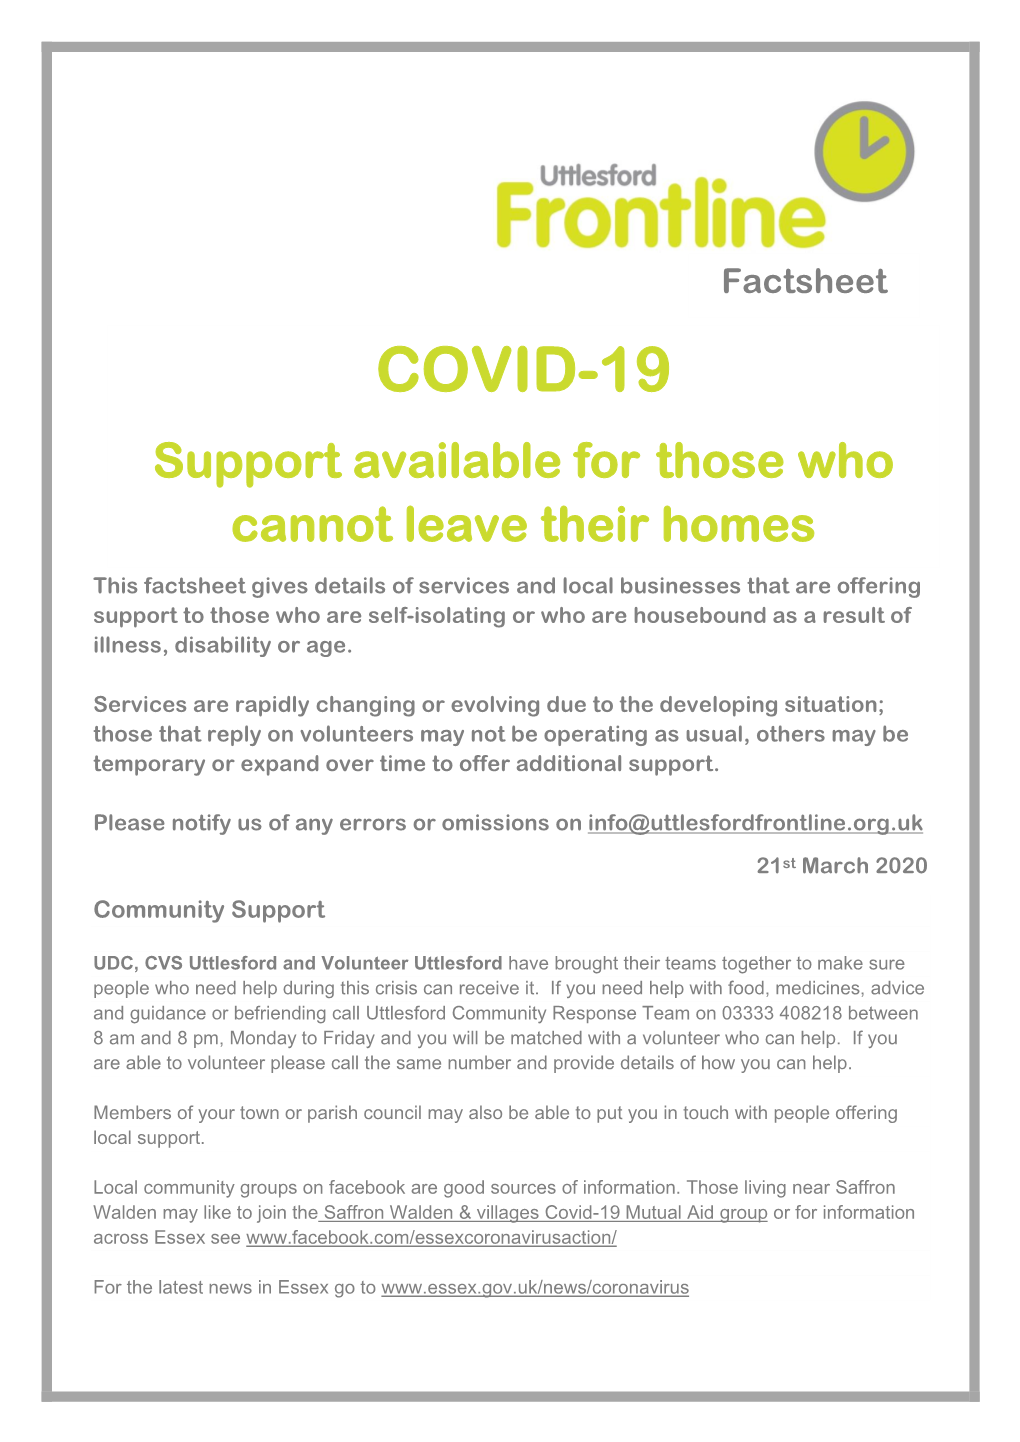 COVID-19 Support Available for Those Who Cannot Leave Their Homes